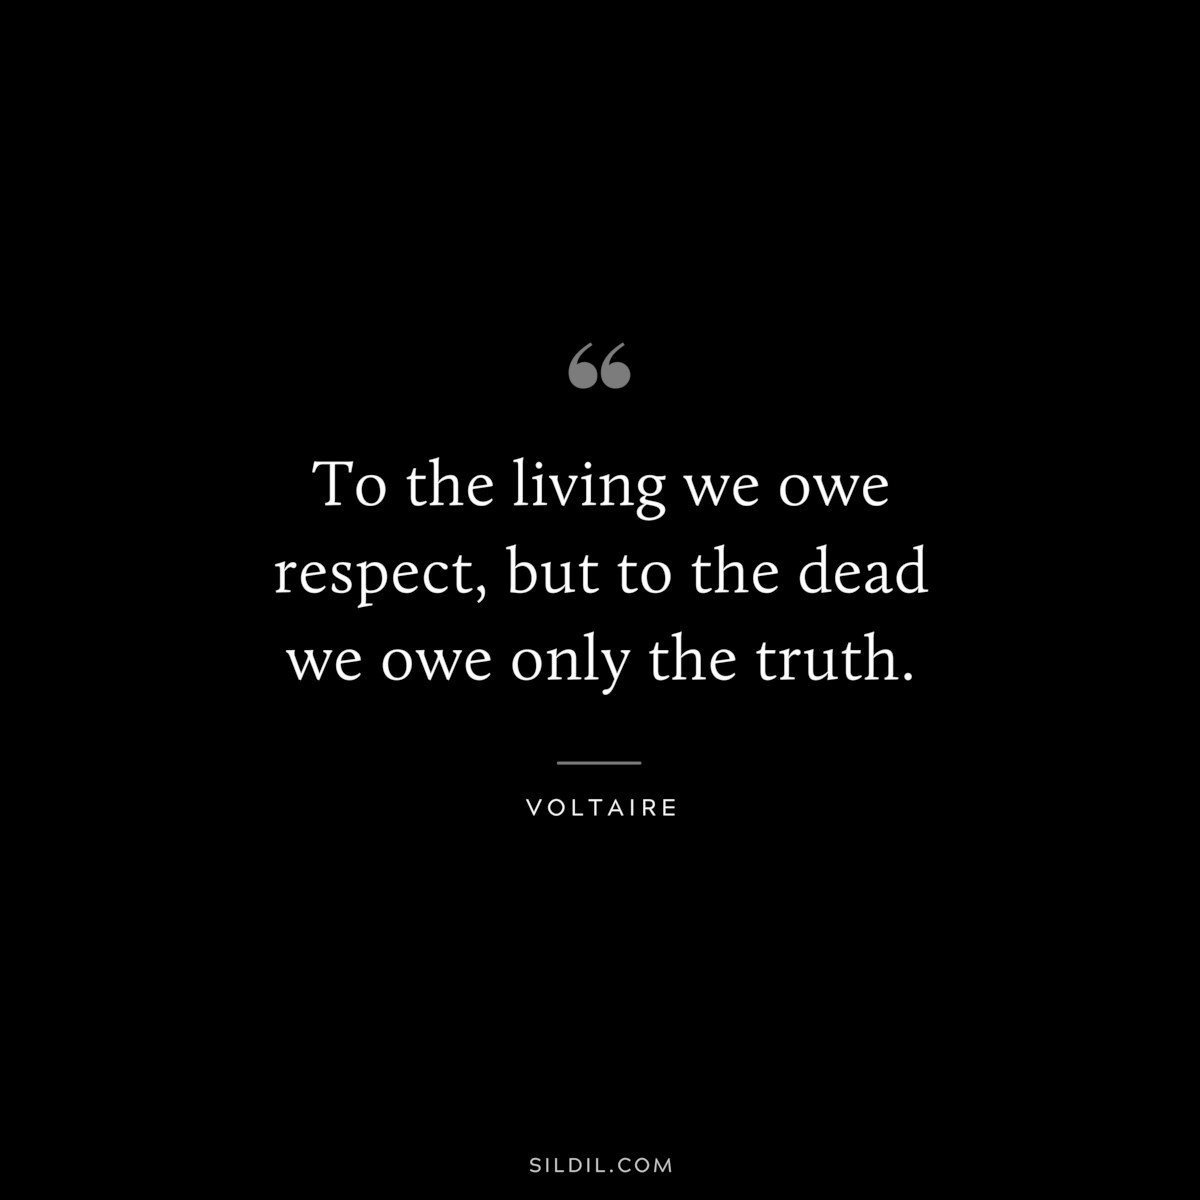 To the living we owe respect, but to the dead we owe only the truth. ― Voltaire